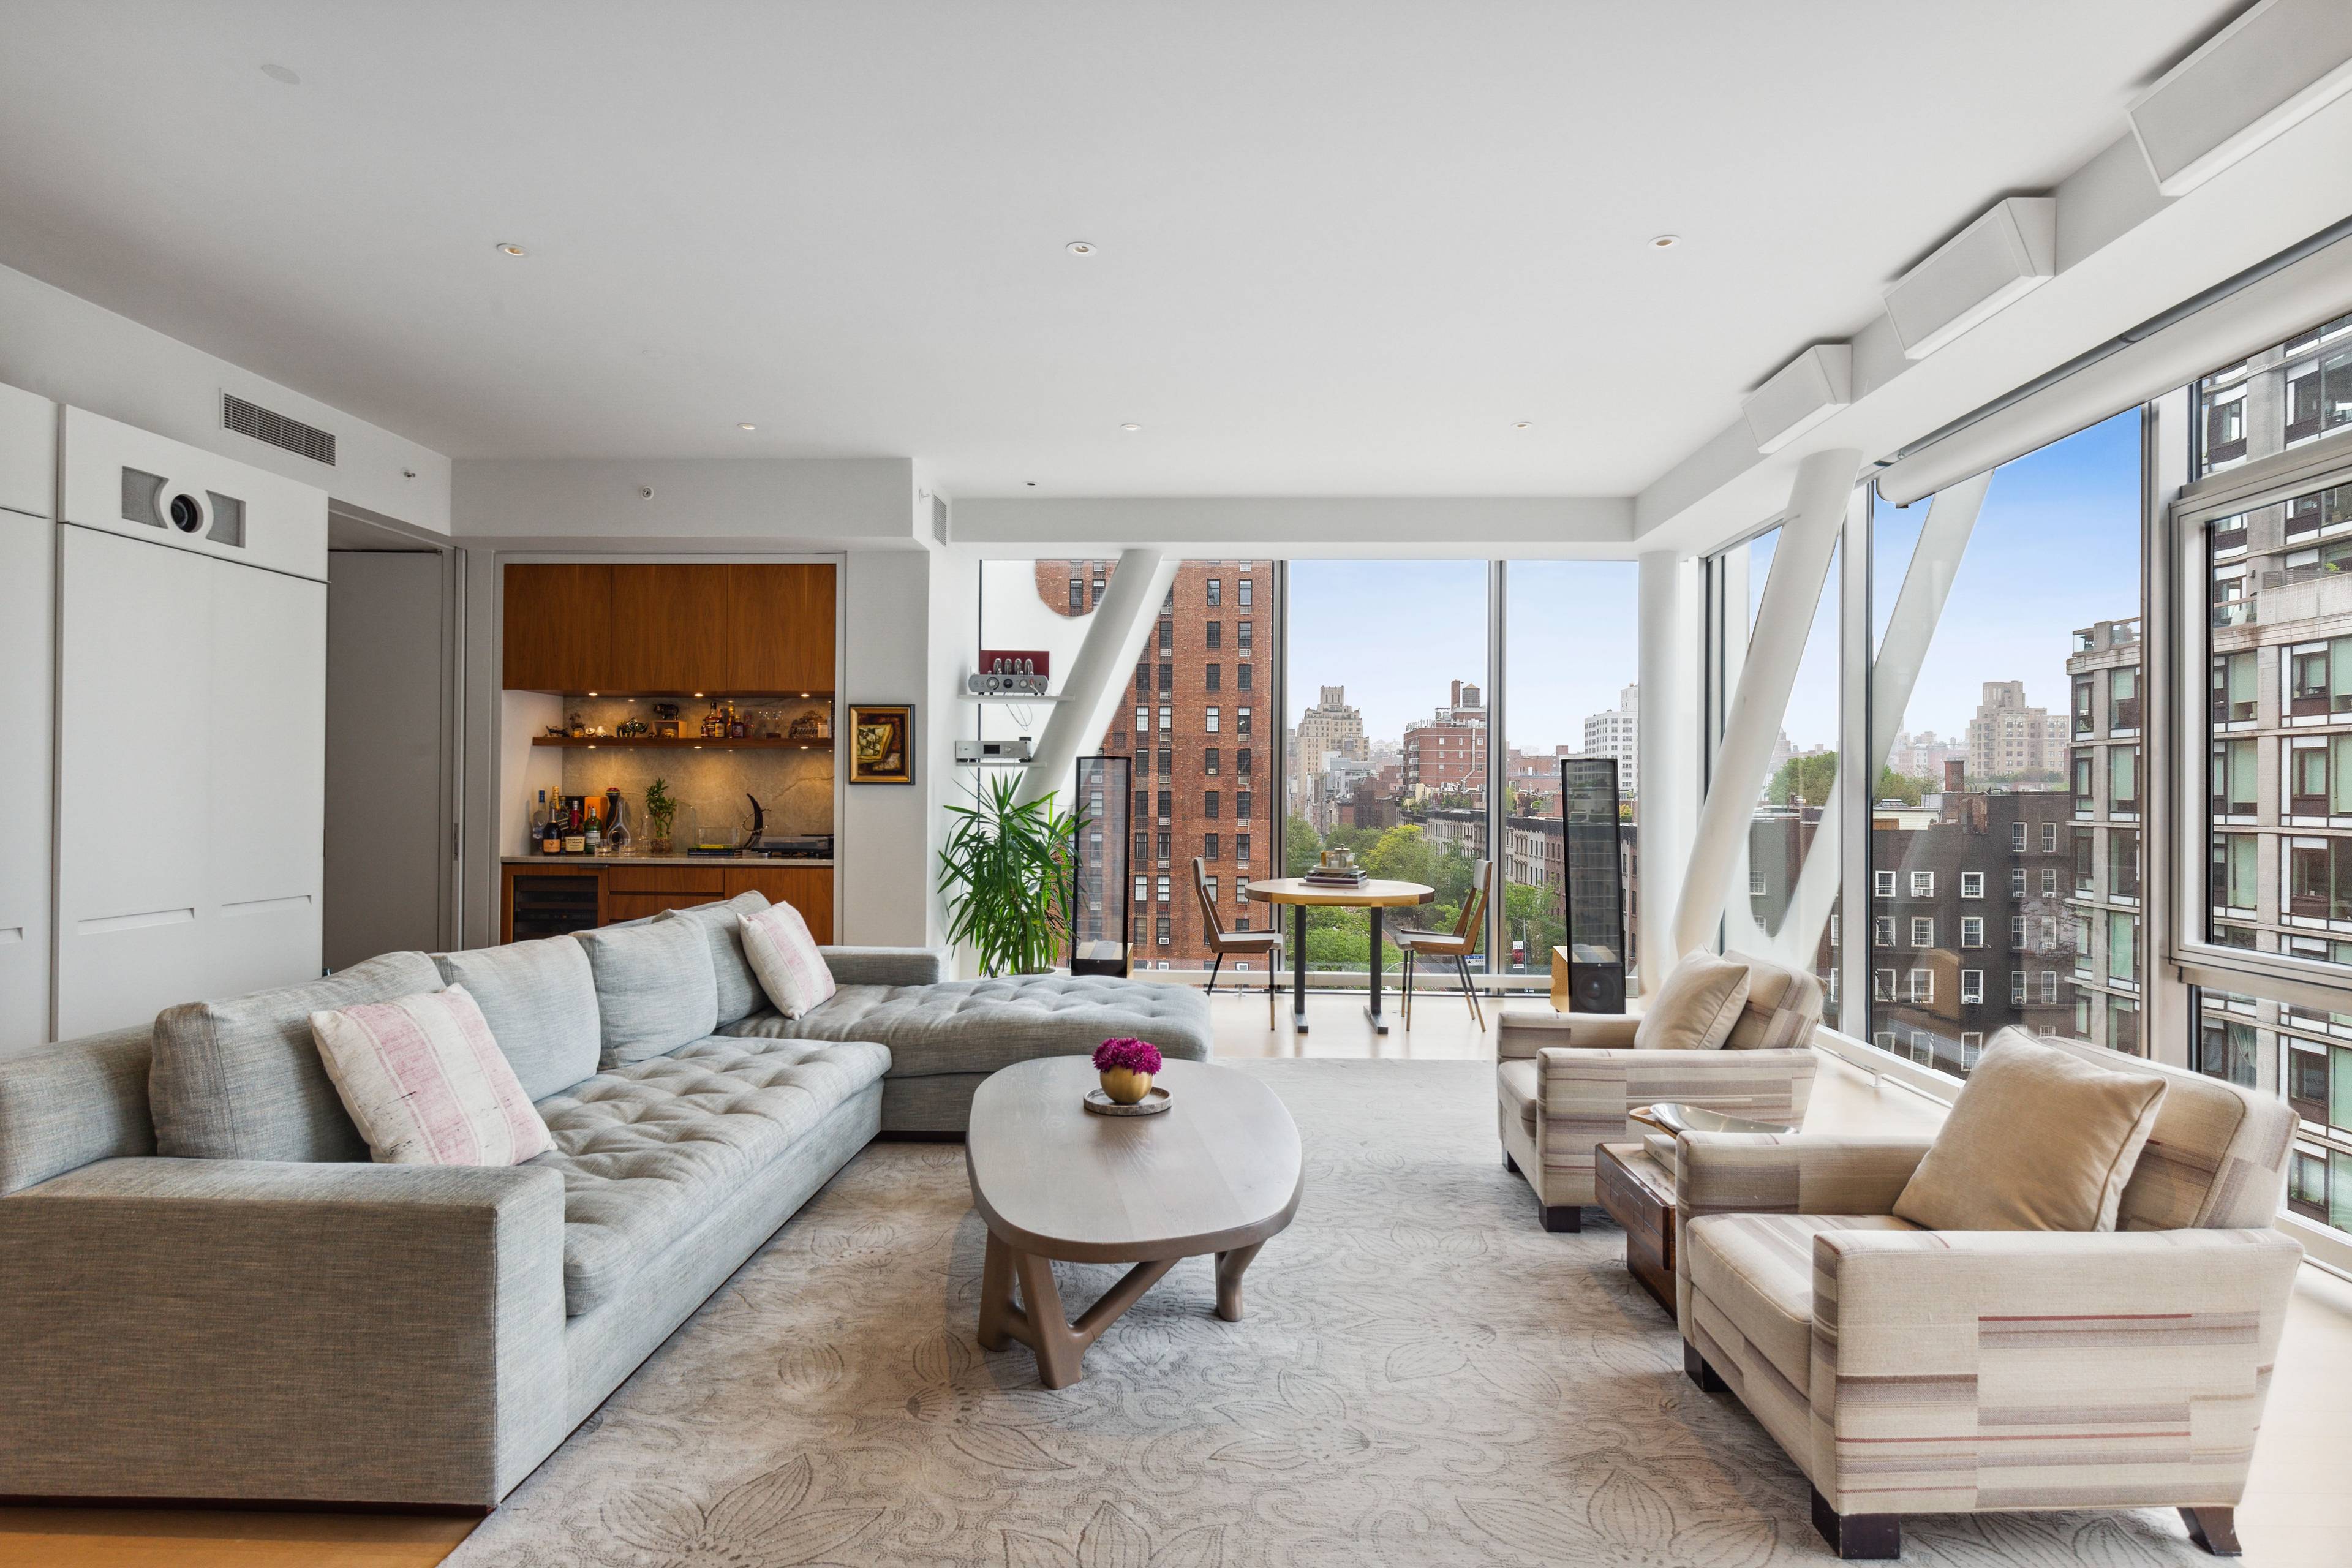 Luxury living in this unique three bedroom three bathroom condominium cantilevered over the High Line with panoramic cityscapes.